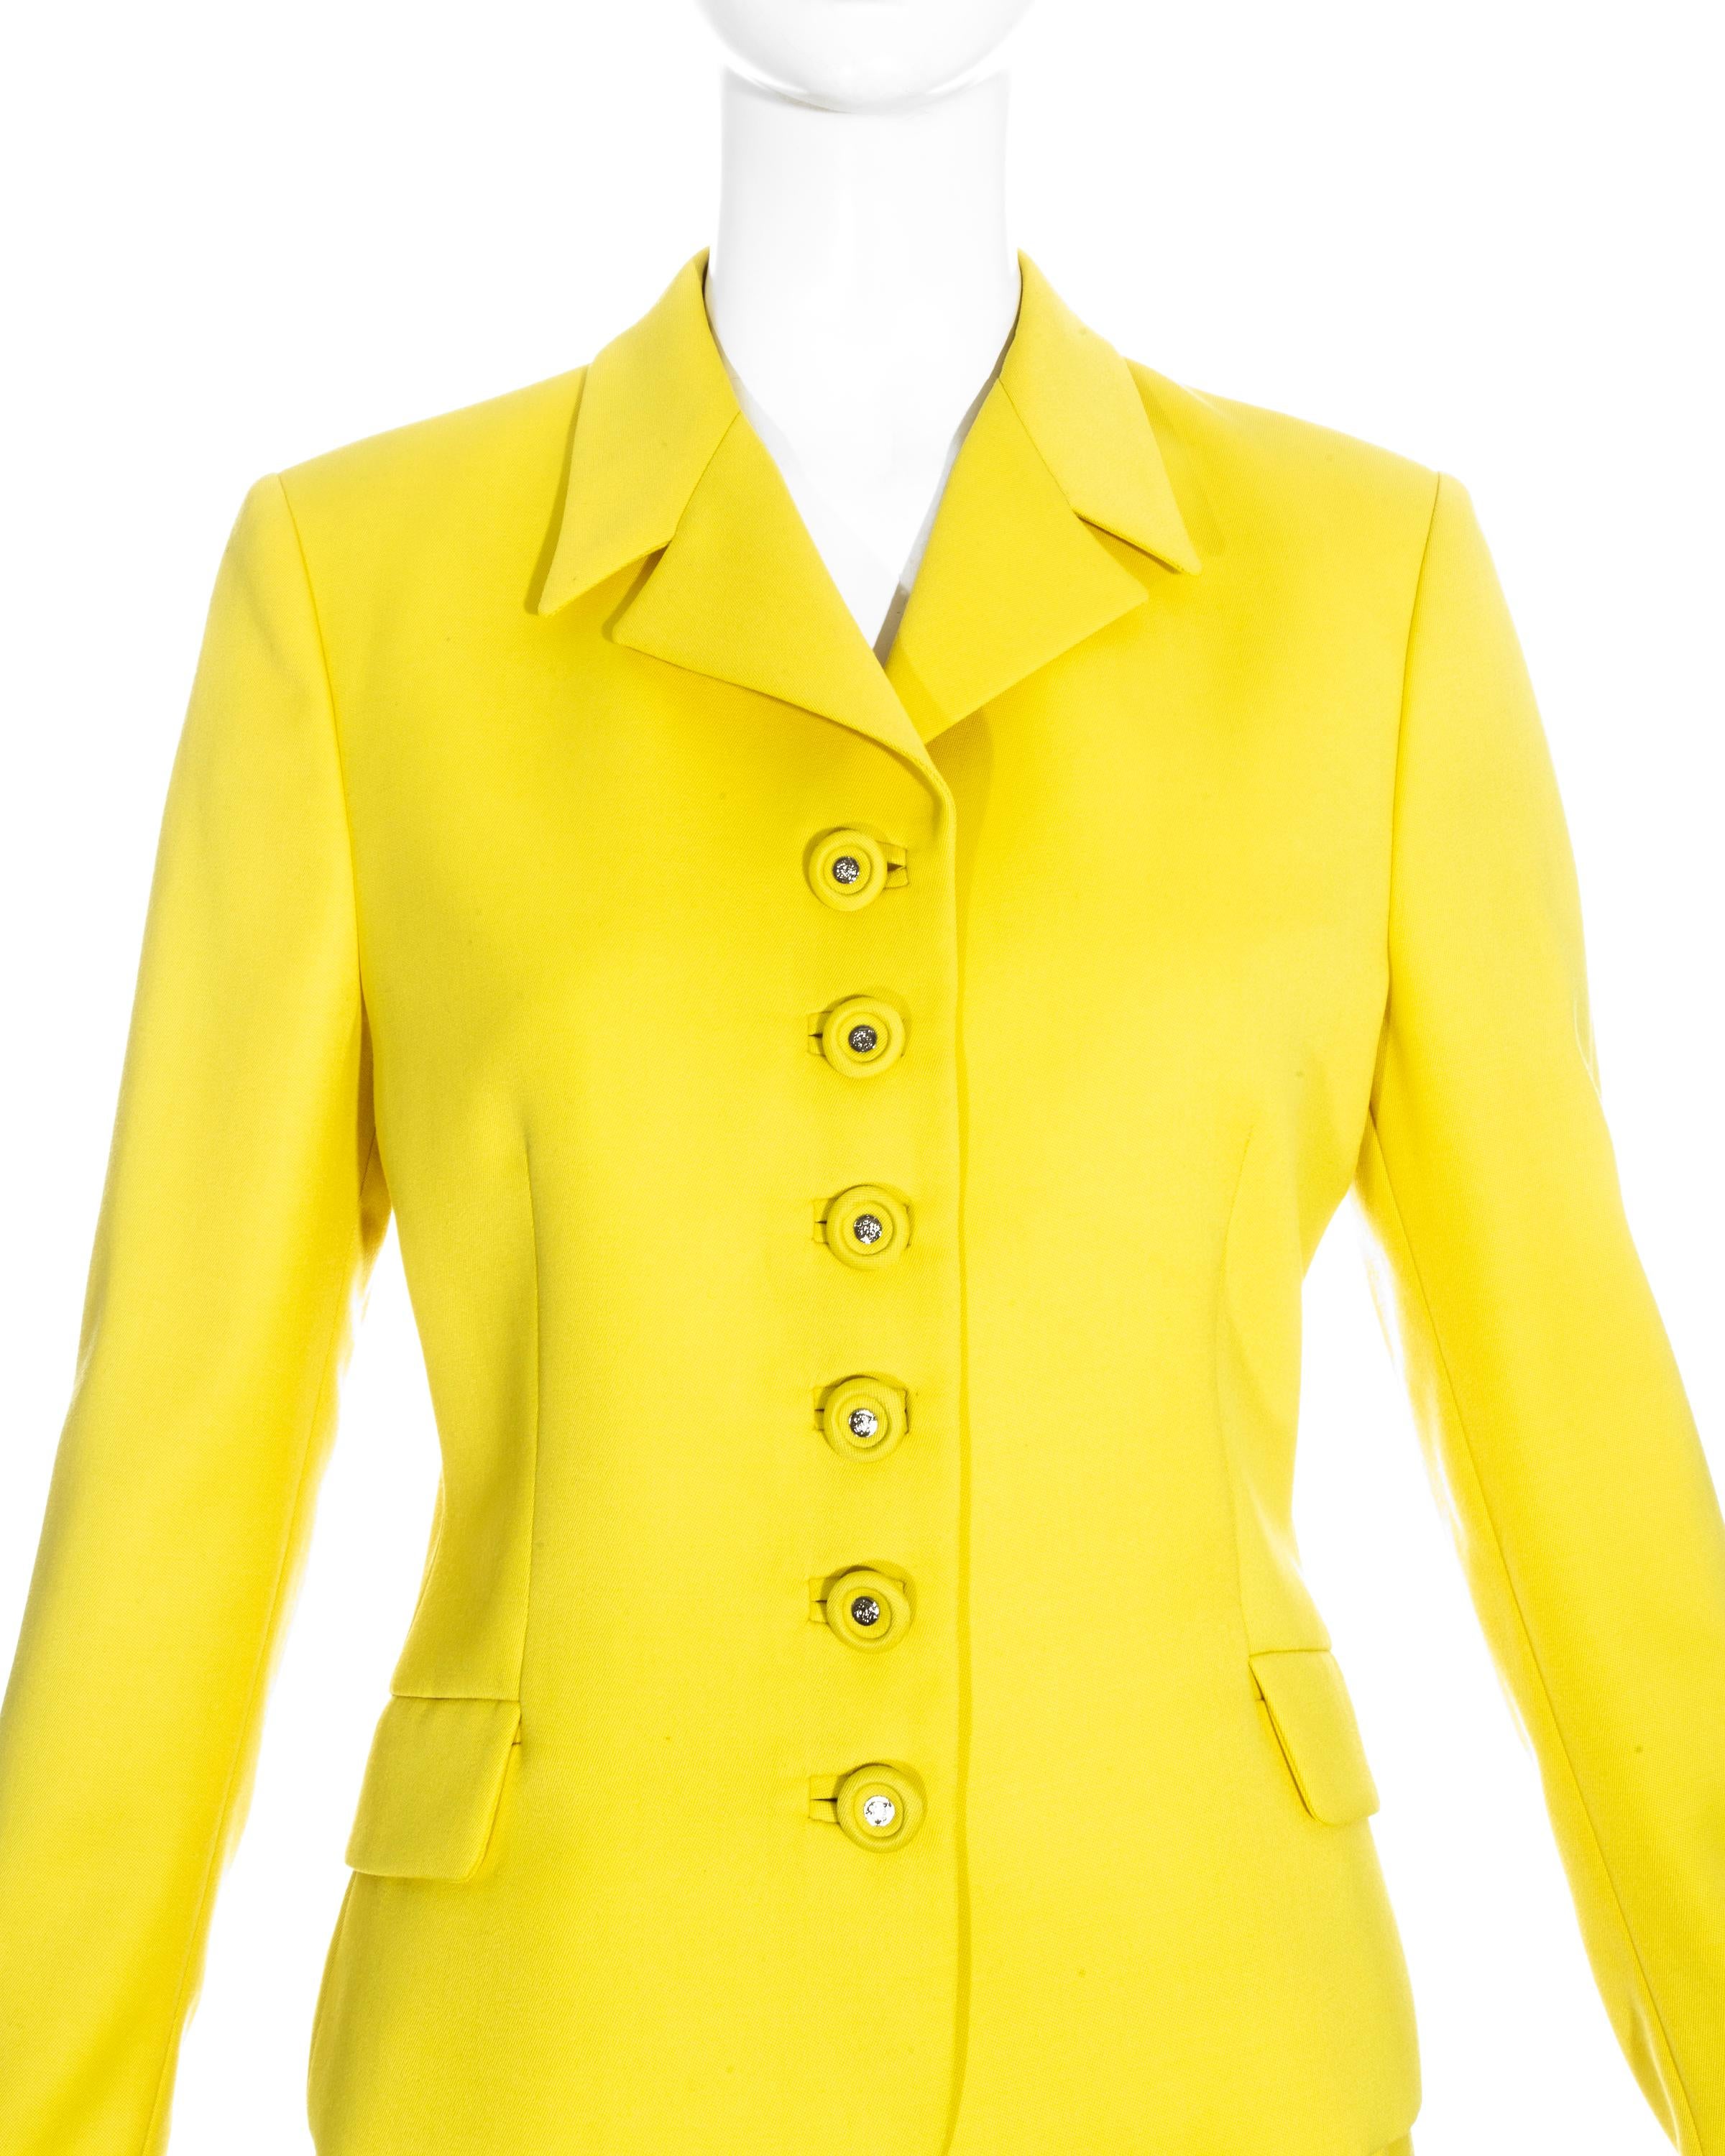 Bright yellow suit with mid-length skirt and single-breasted jacket with Medusa buttons by Gianni Versace

Spring-summer 1996